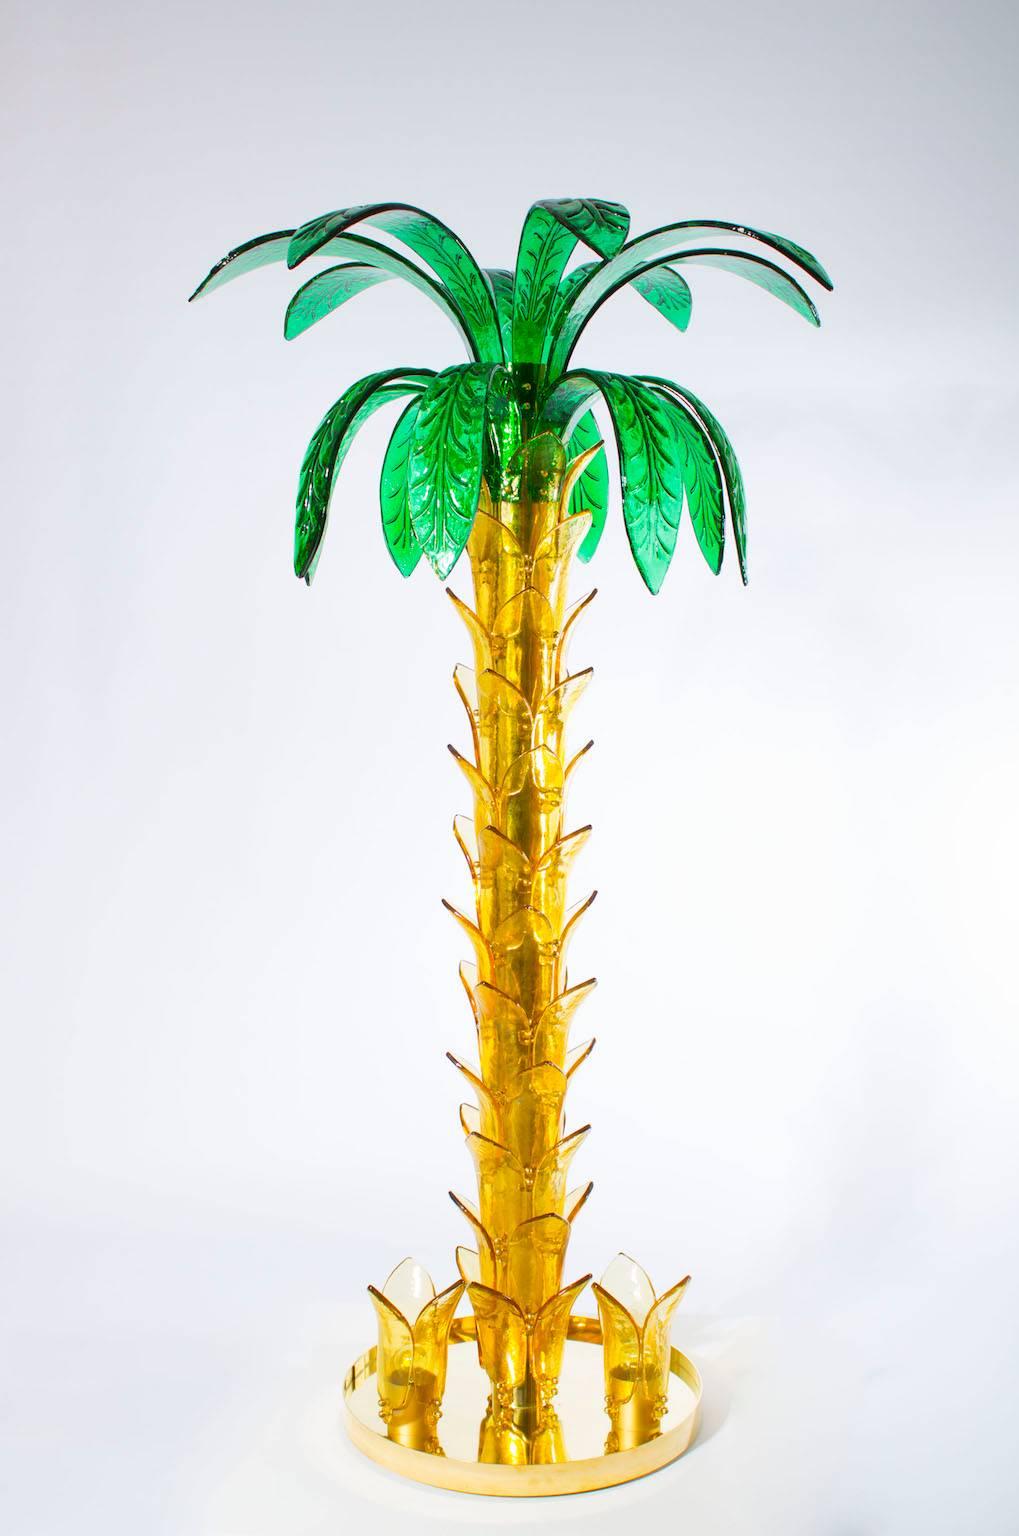 Hand-Crafted Italian Venetian Palm in Murano Glass Amber and Green